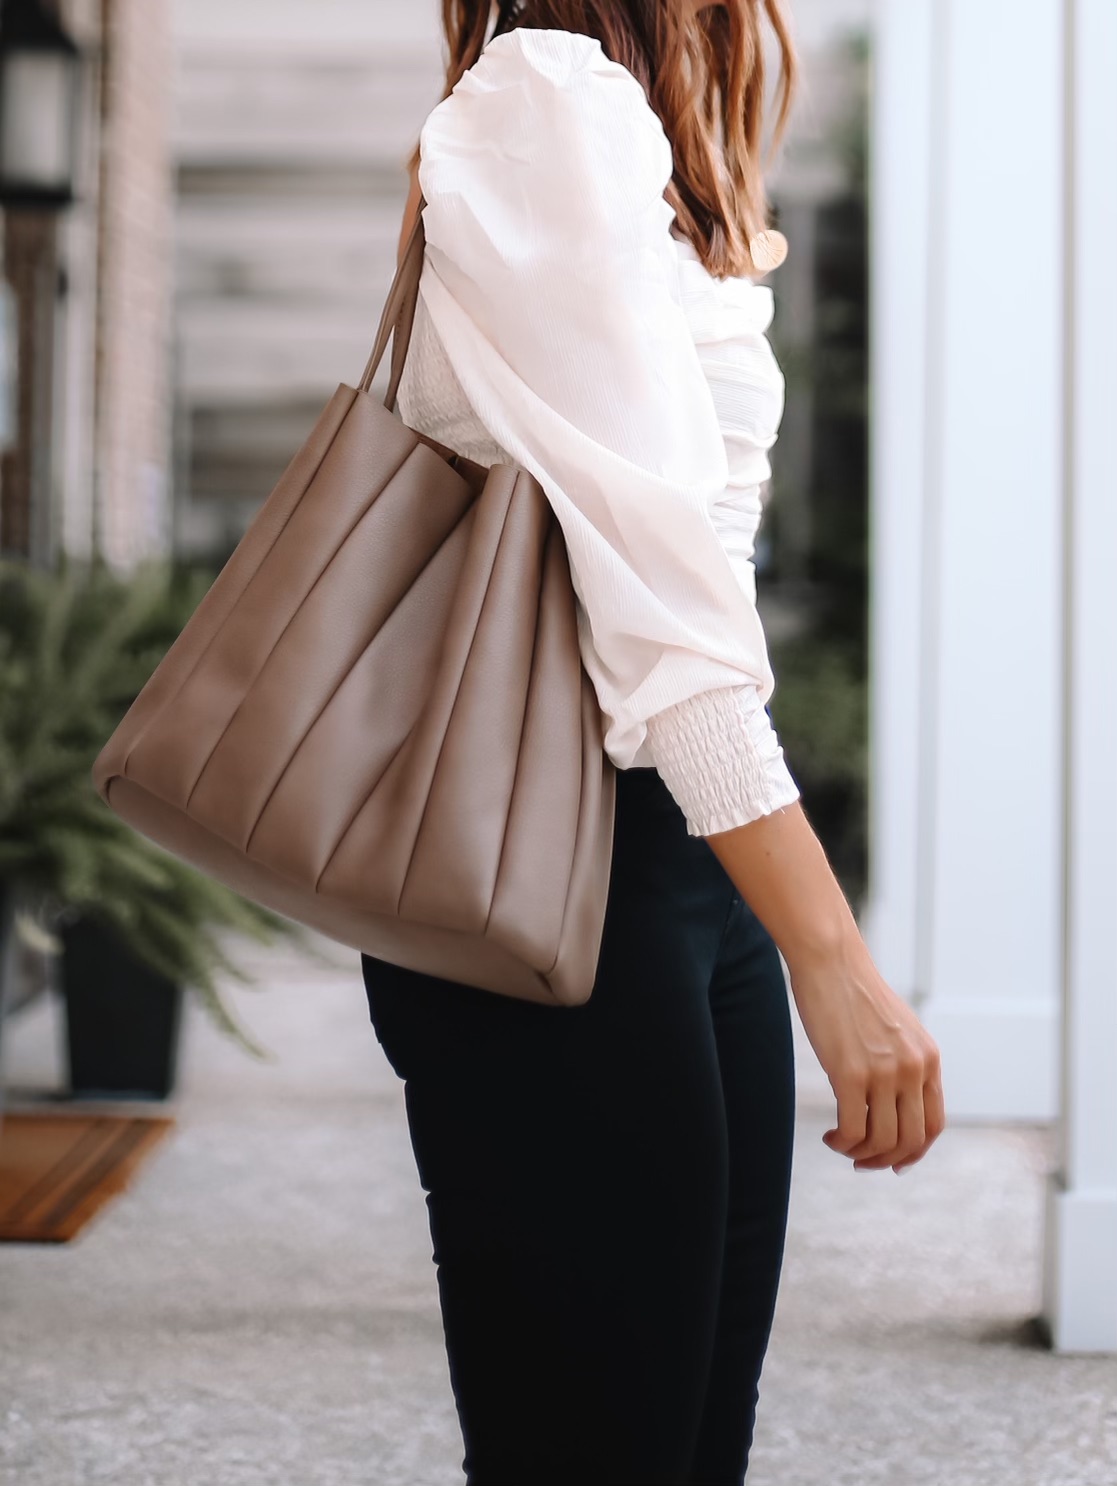 nordstrom workwear, nordstrom fall style